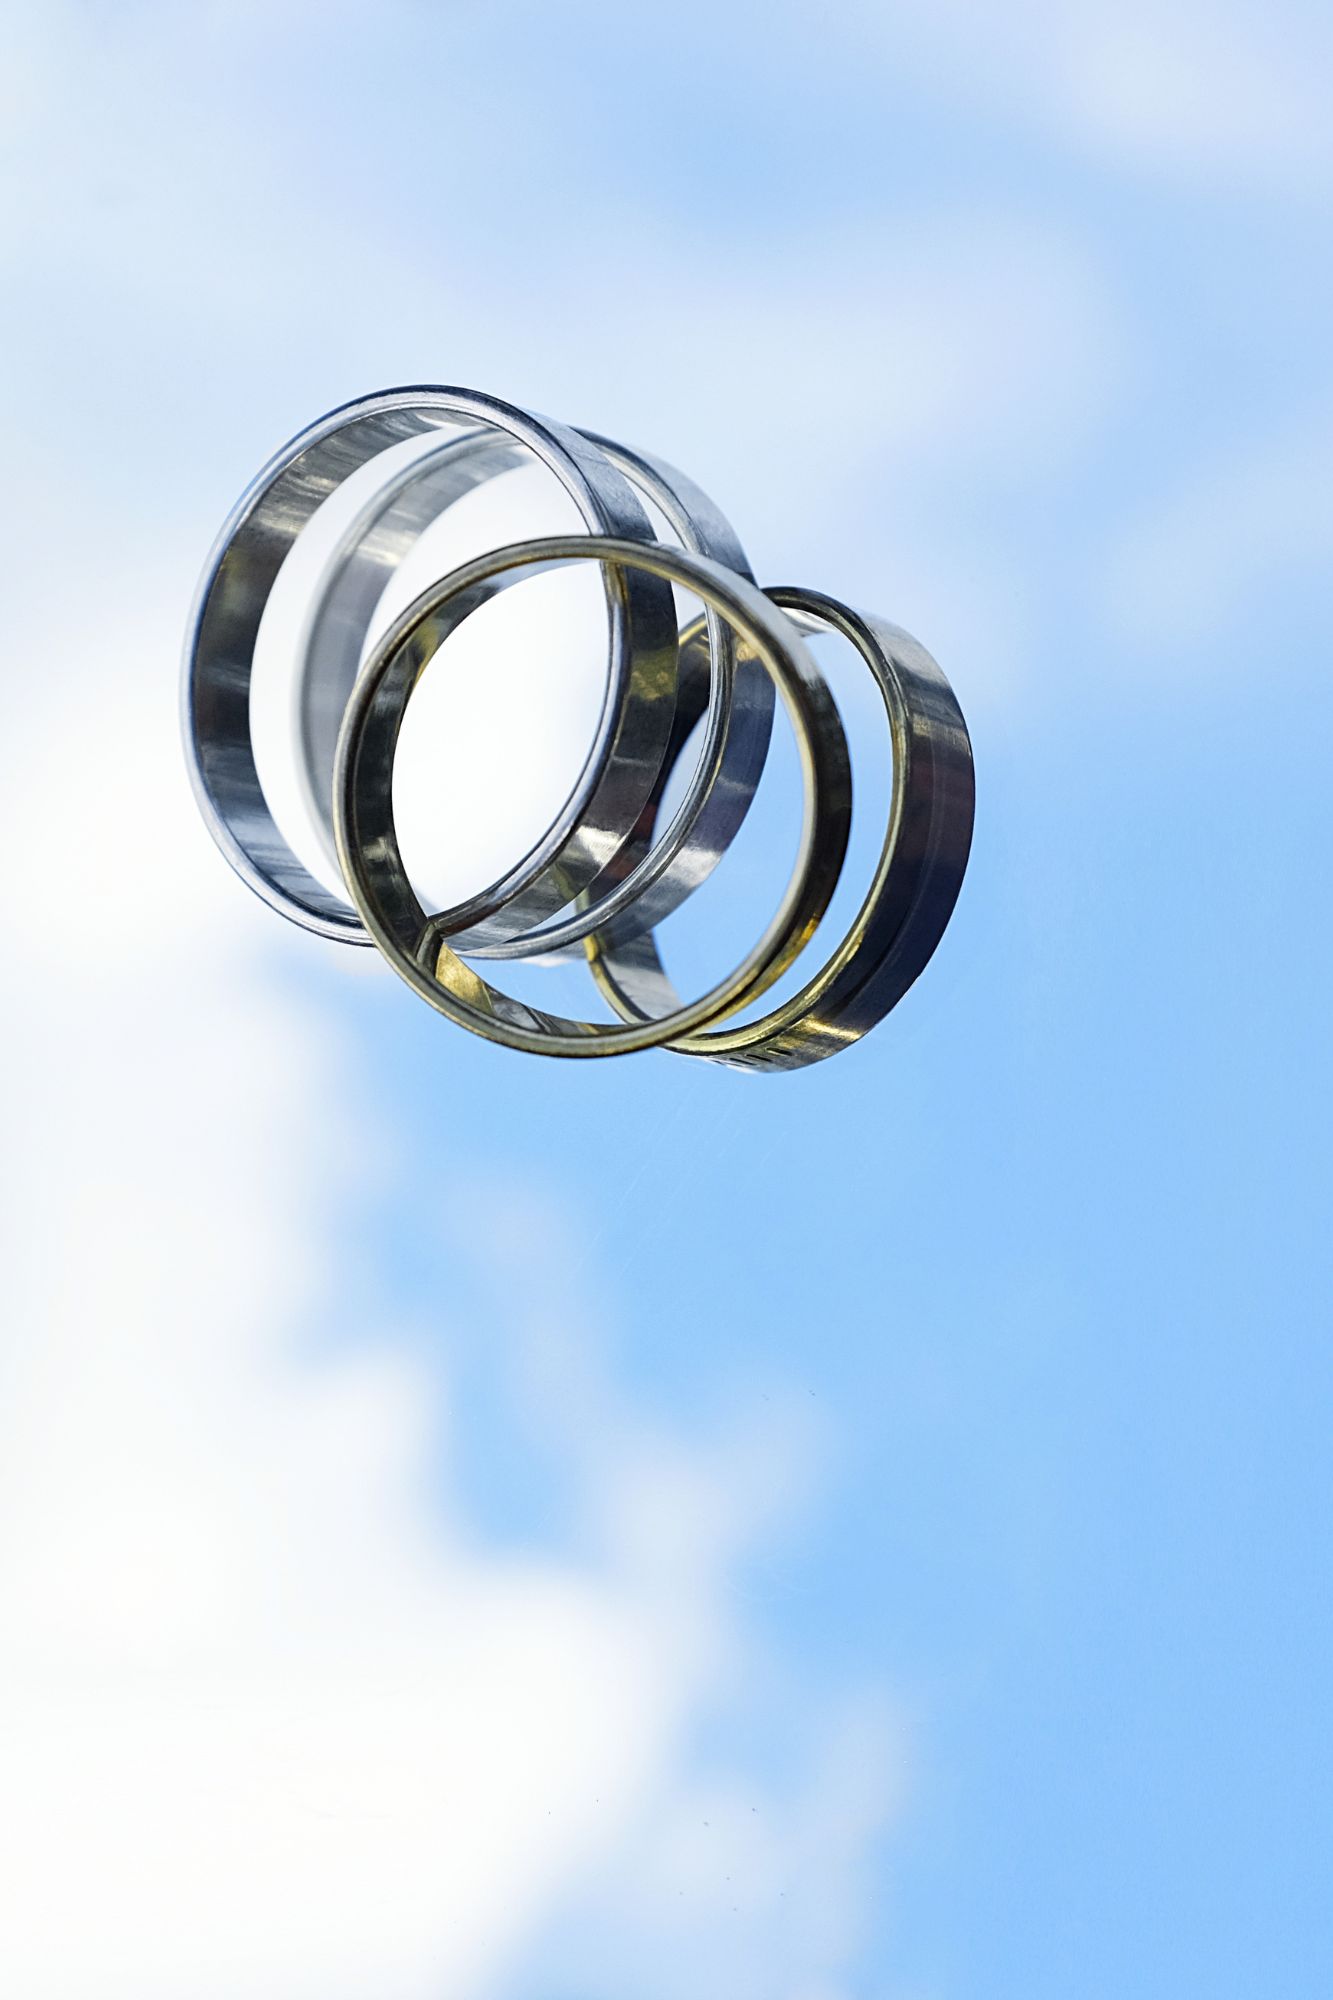 Two rings reflect sunlight and sky from below